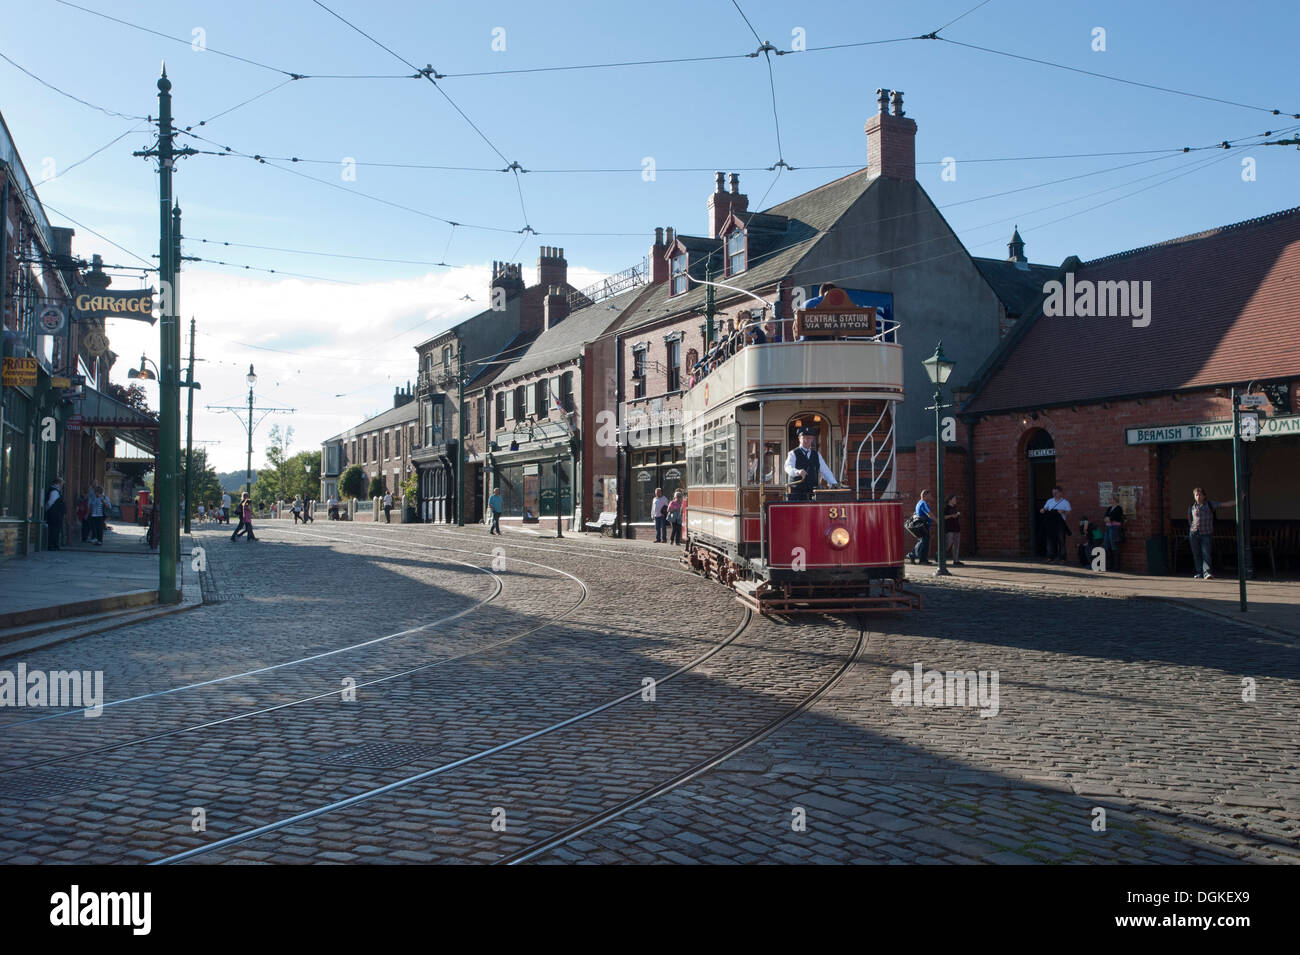 Vintage tram with passengers in open air museum. Stock Photo